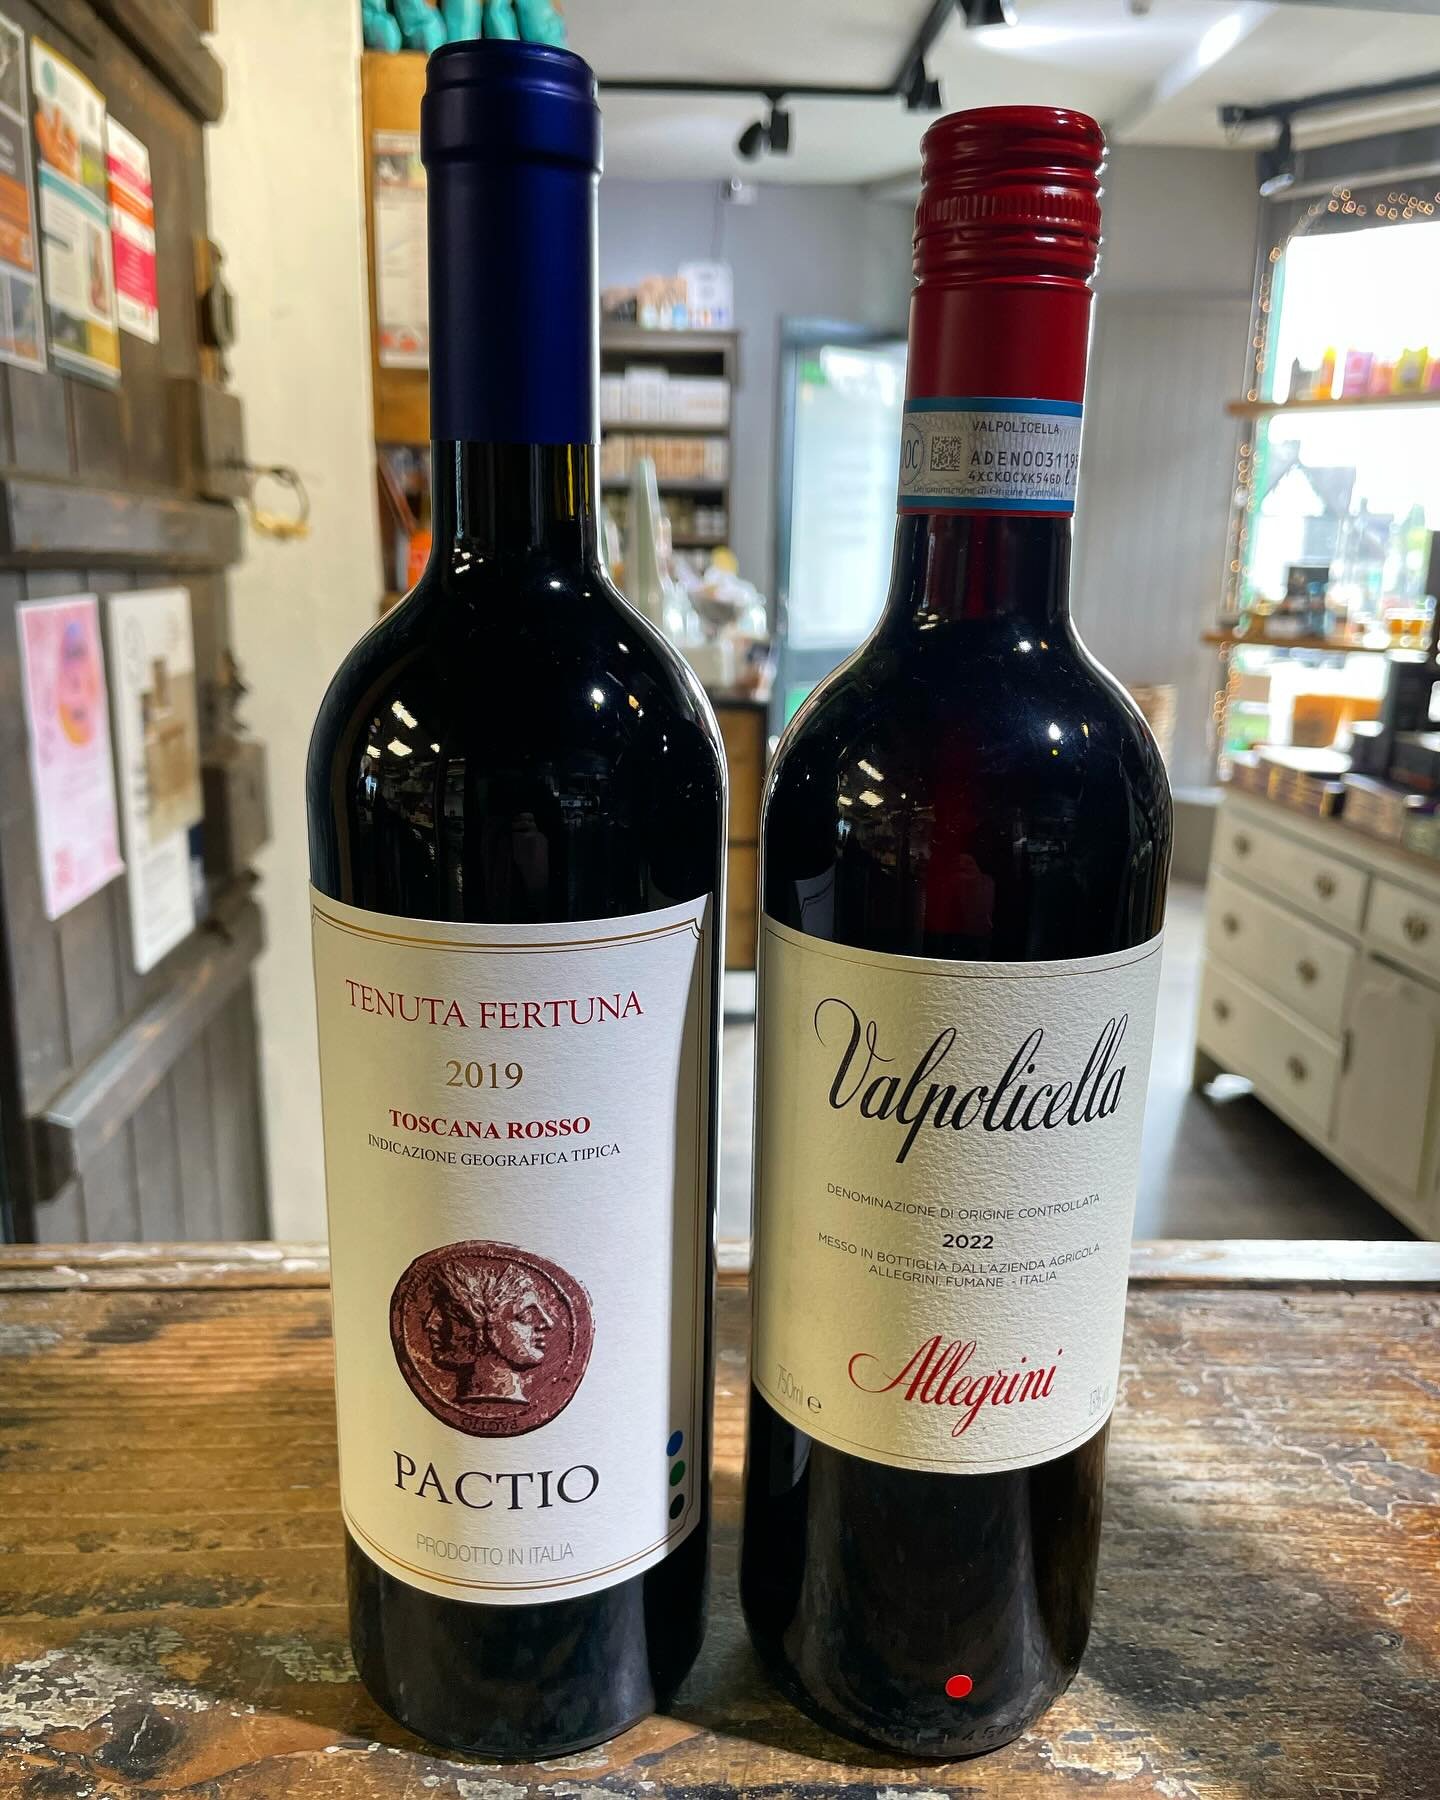 🇮🇹🍷Celebrate the bank holiday weekend with some Italian Red wine 🇮🇹 🍷
🍷 For our Italain wines we have Allegrini Valpolicella from the Valpolicella region, made from two indigenous grape varieties: Corvina &amp; Rondinella, it is a light red wi